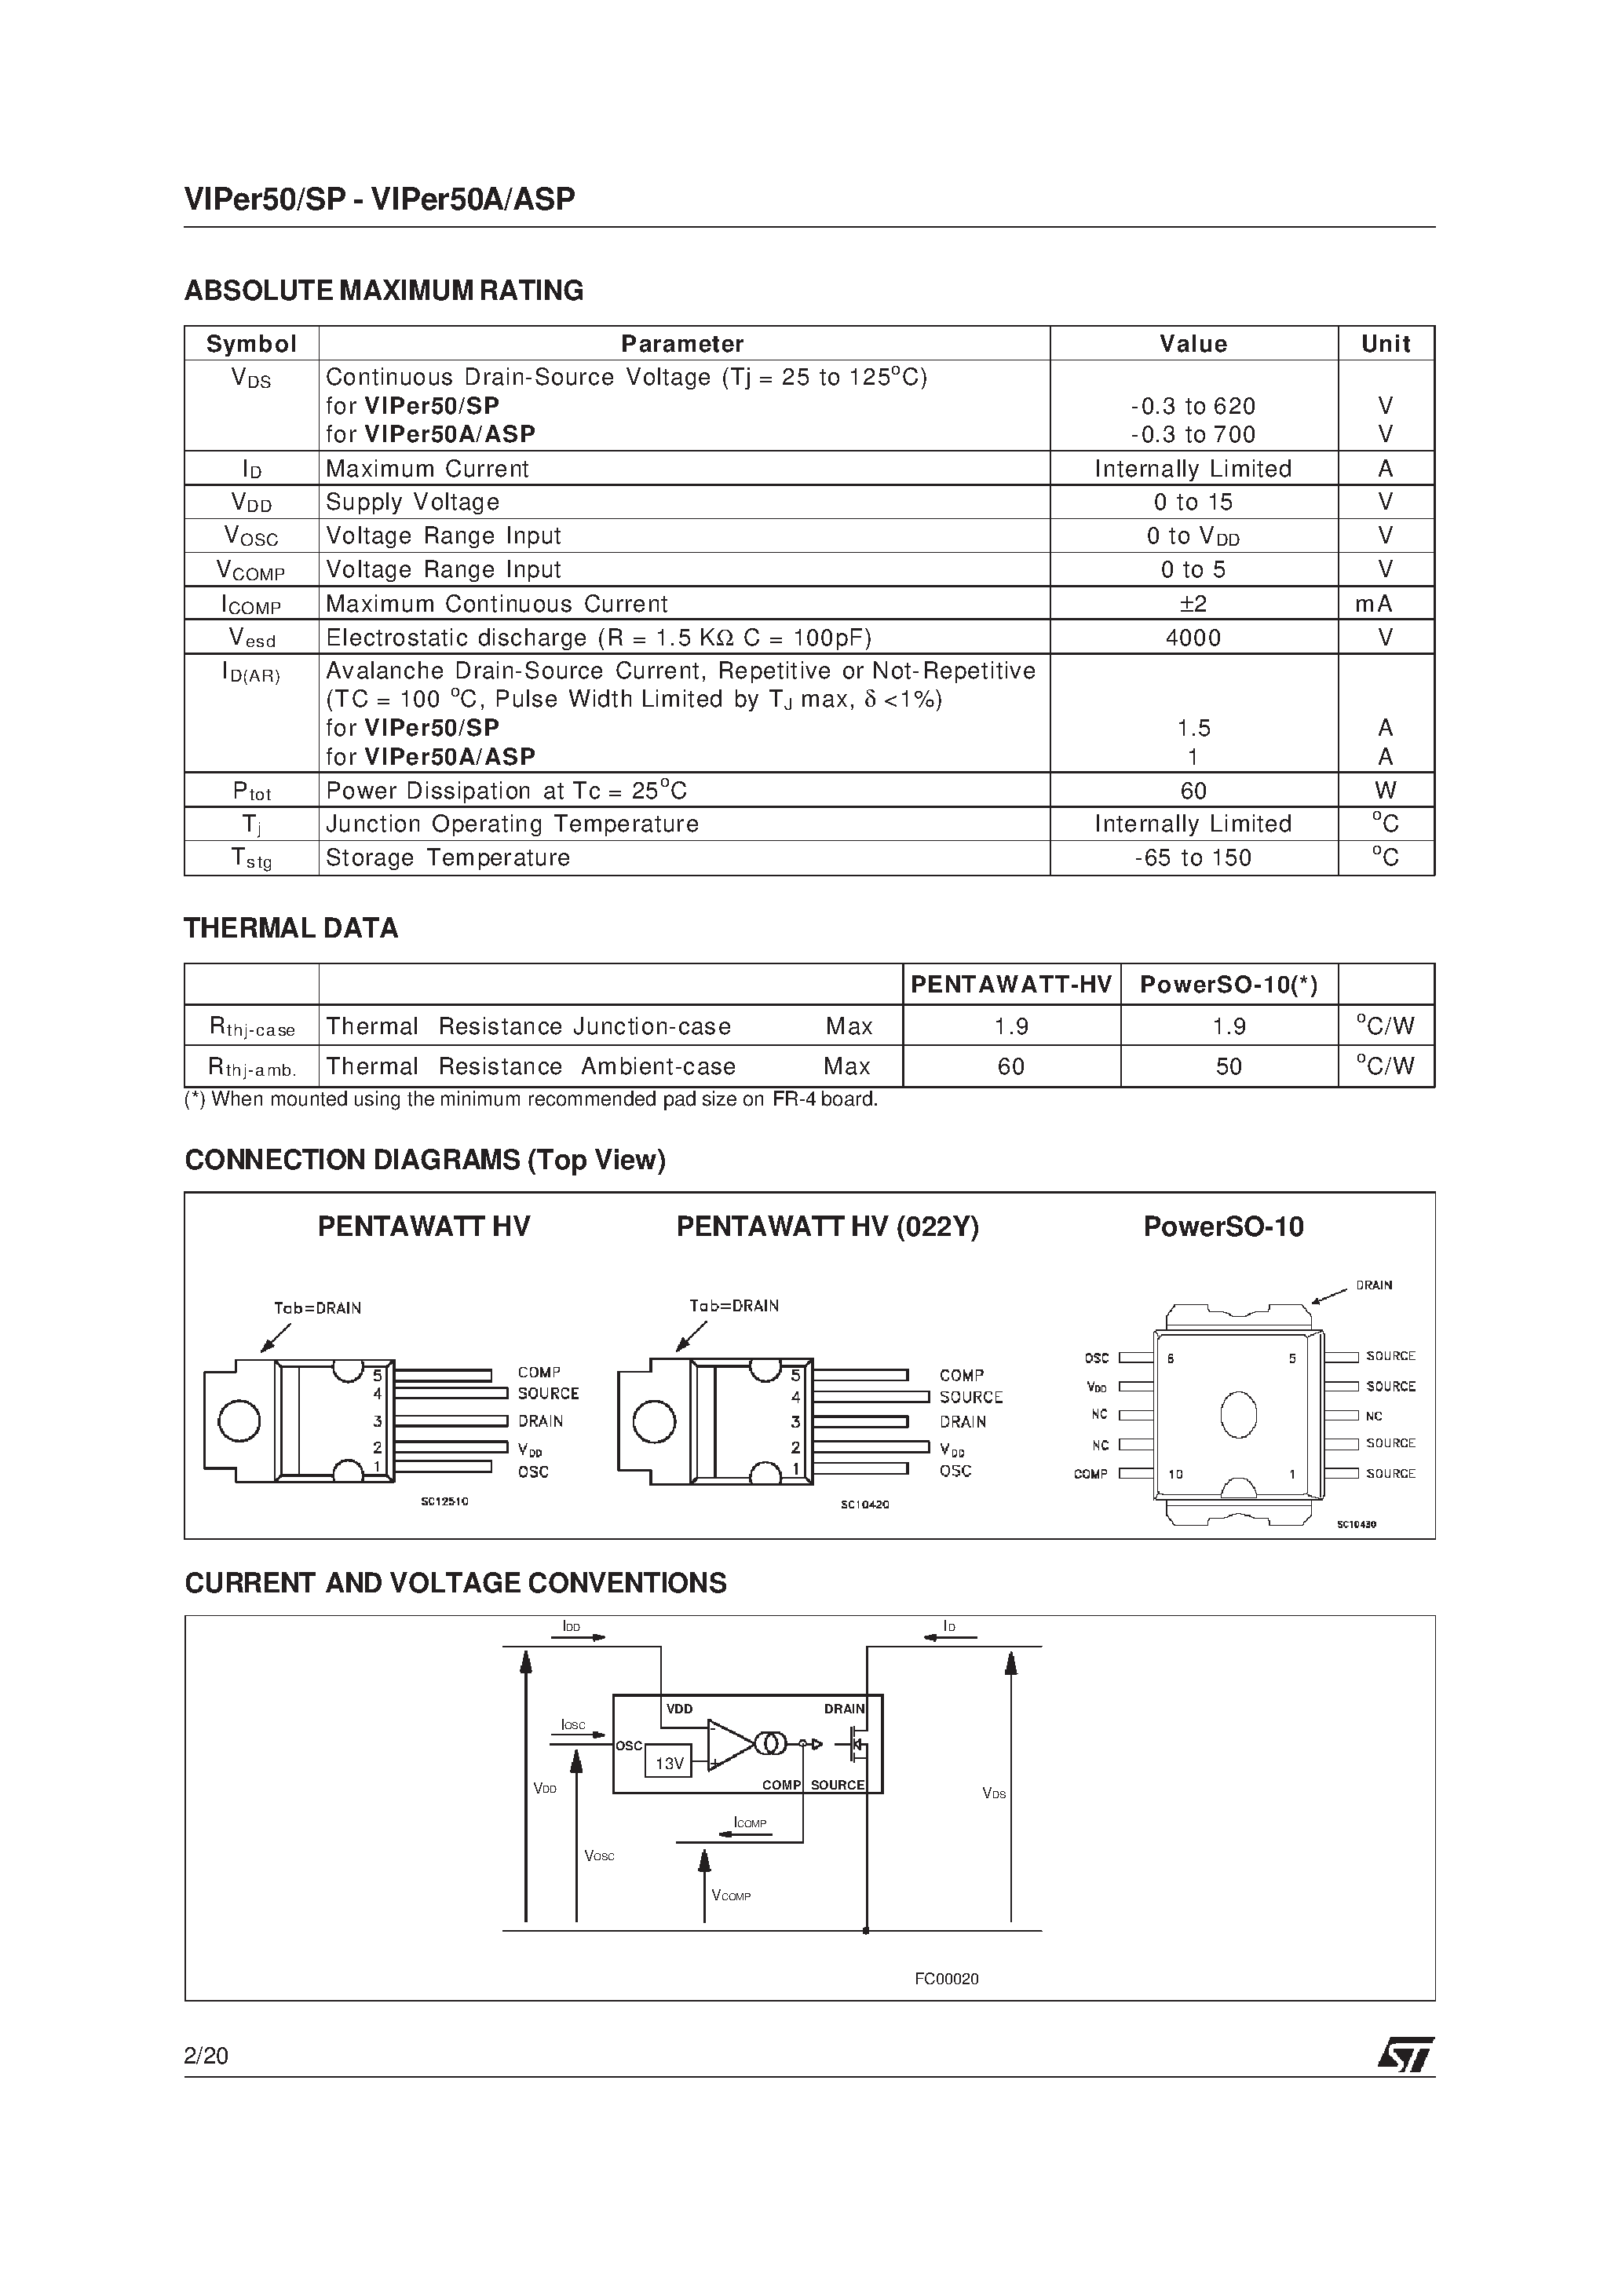 Datasheet VIPER50 - SMPS PRIMARY I.C. page 2